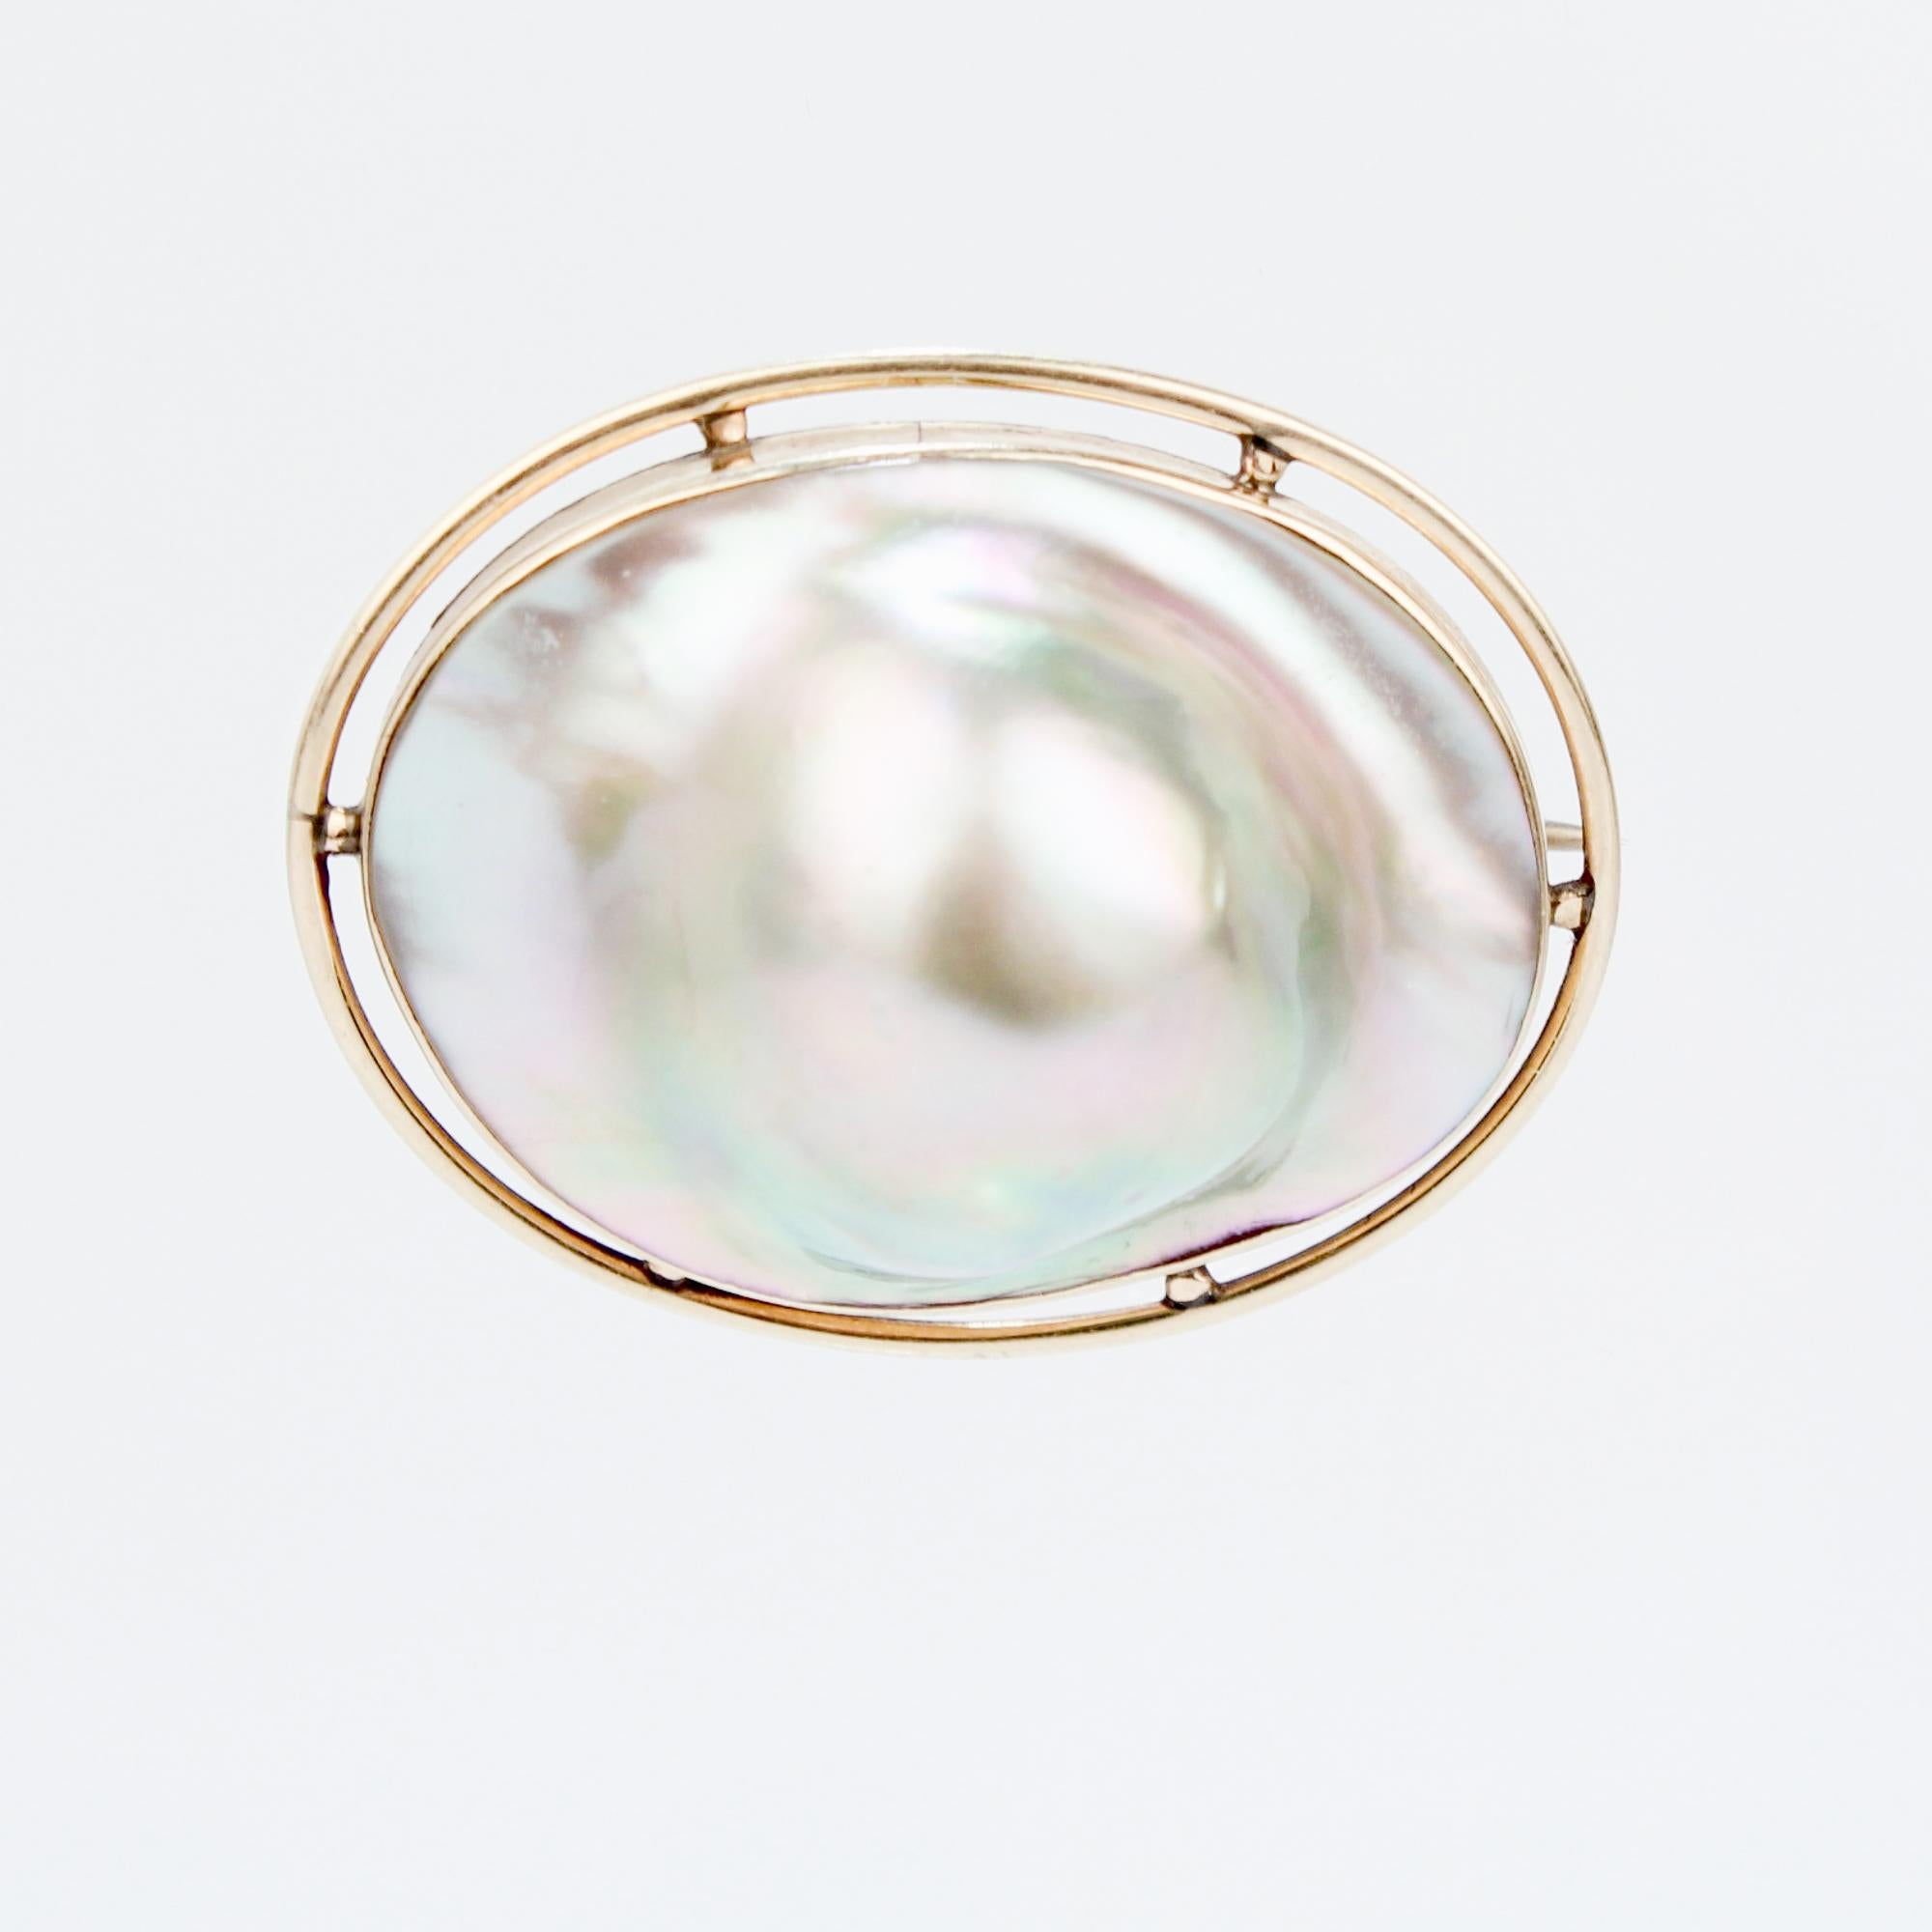 A fine vintage gold & blister pearl brooch.

Comprising a bulbous blister pearl in a circular gold setting.

With a pin and 'C' shaped catch to the reverse.

Simply a wonderful brooch!
 
Date:
Mid-20th Century

Overall Condition:
It is in overall